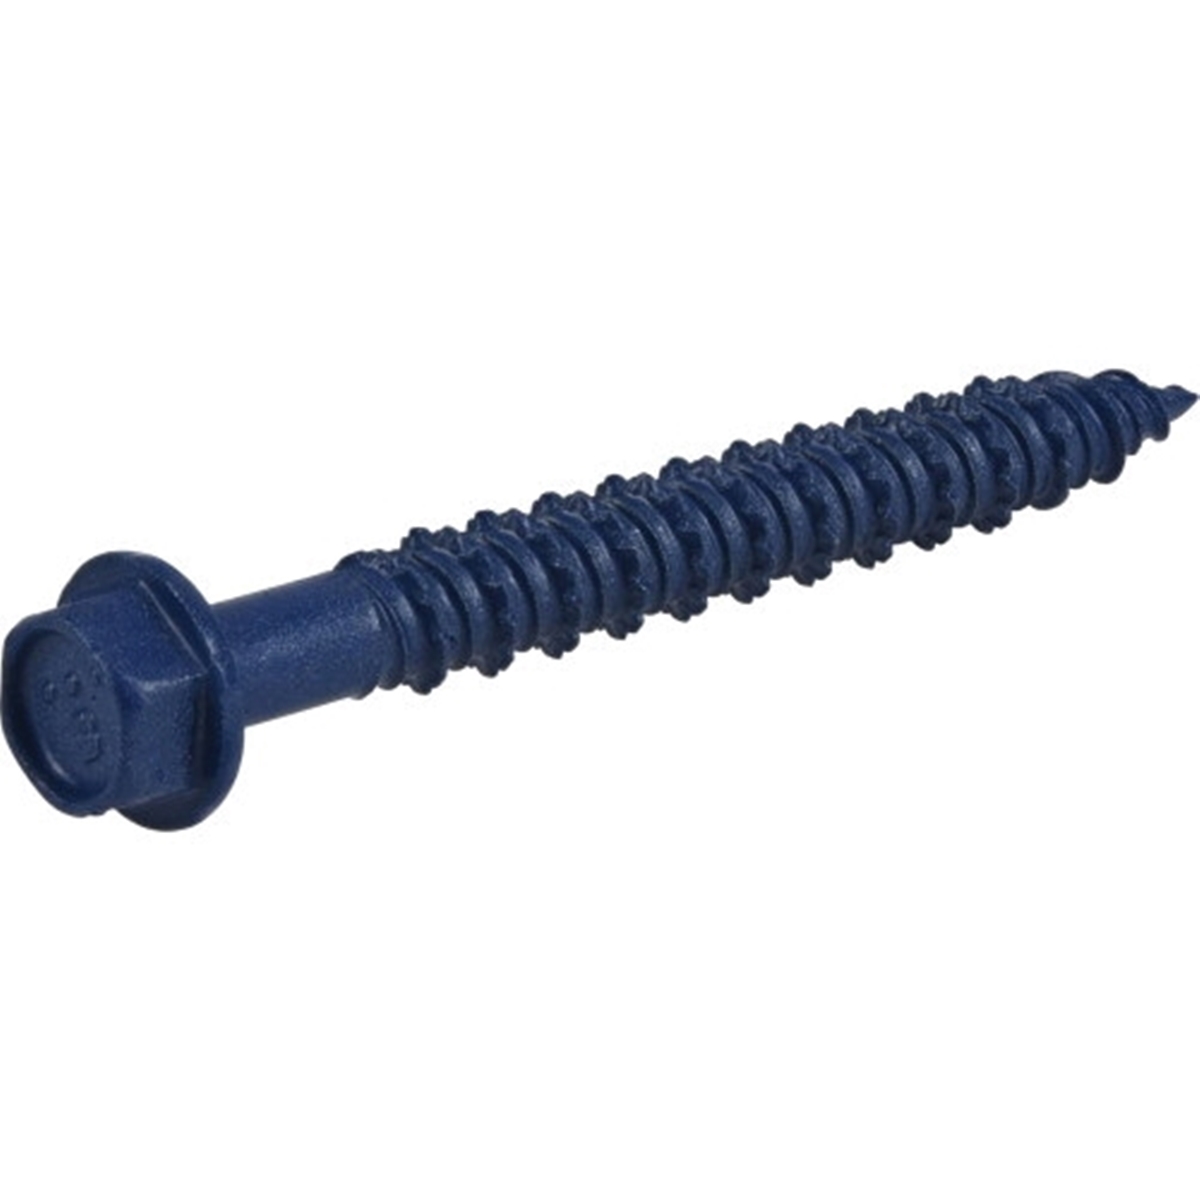 376510 Concrete Screw Anchor, 1/4 in Dia, 2-1/4 in L, Carbon Steel, Epoxy-Coated, 100/PK